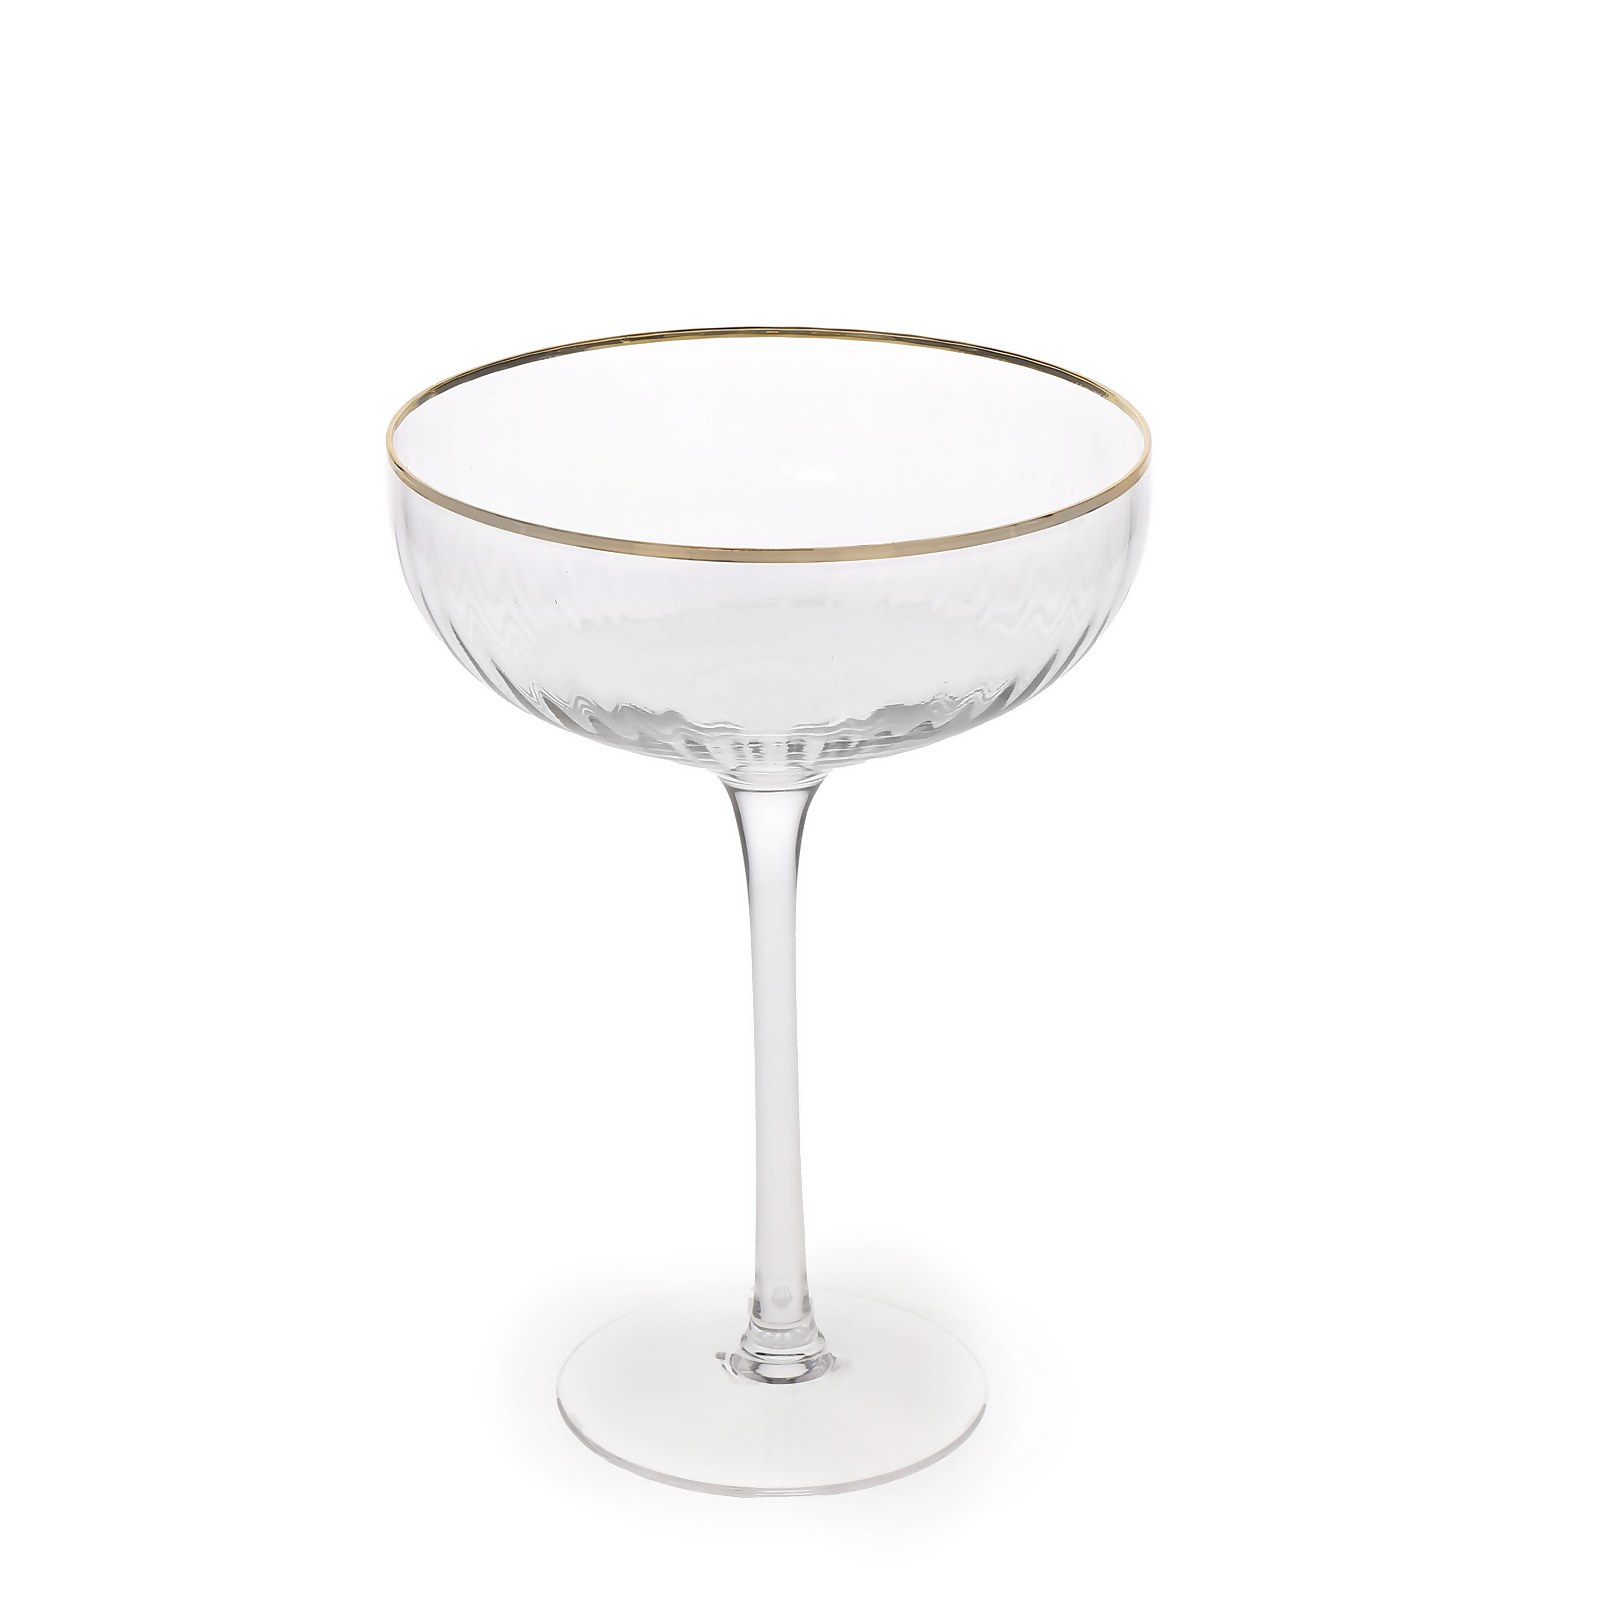 Photo of House Beautiful Textured Gold Detail Champagne Saucer